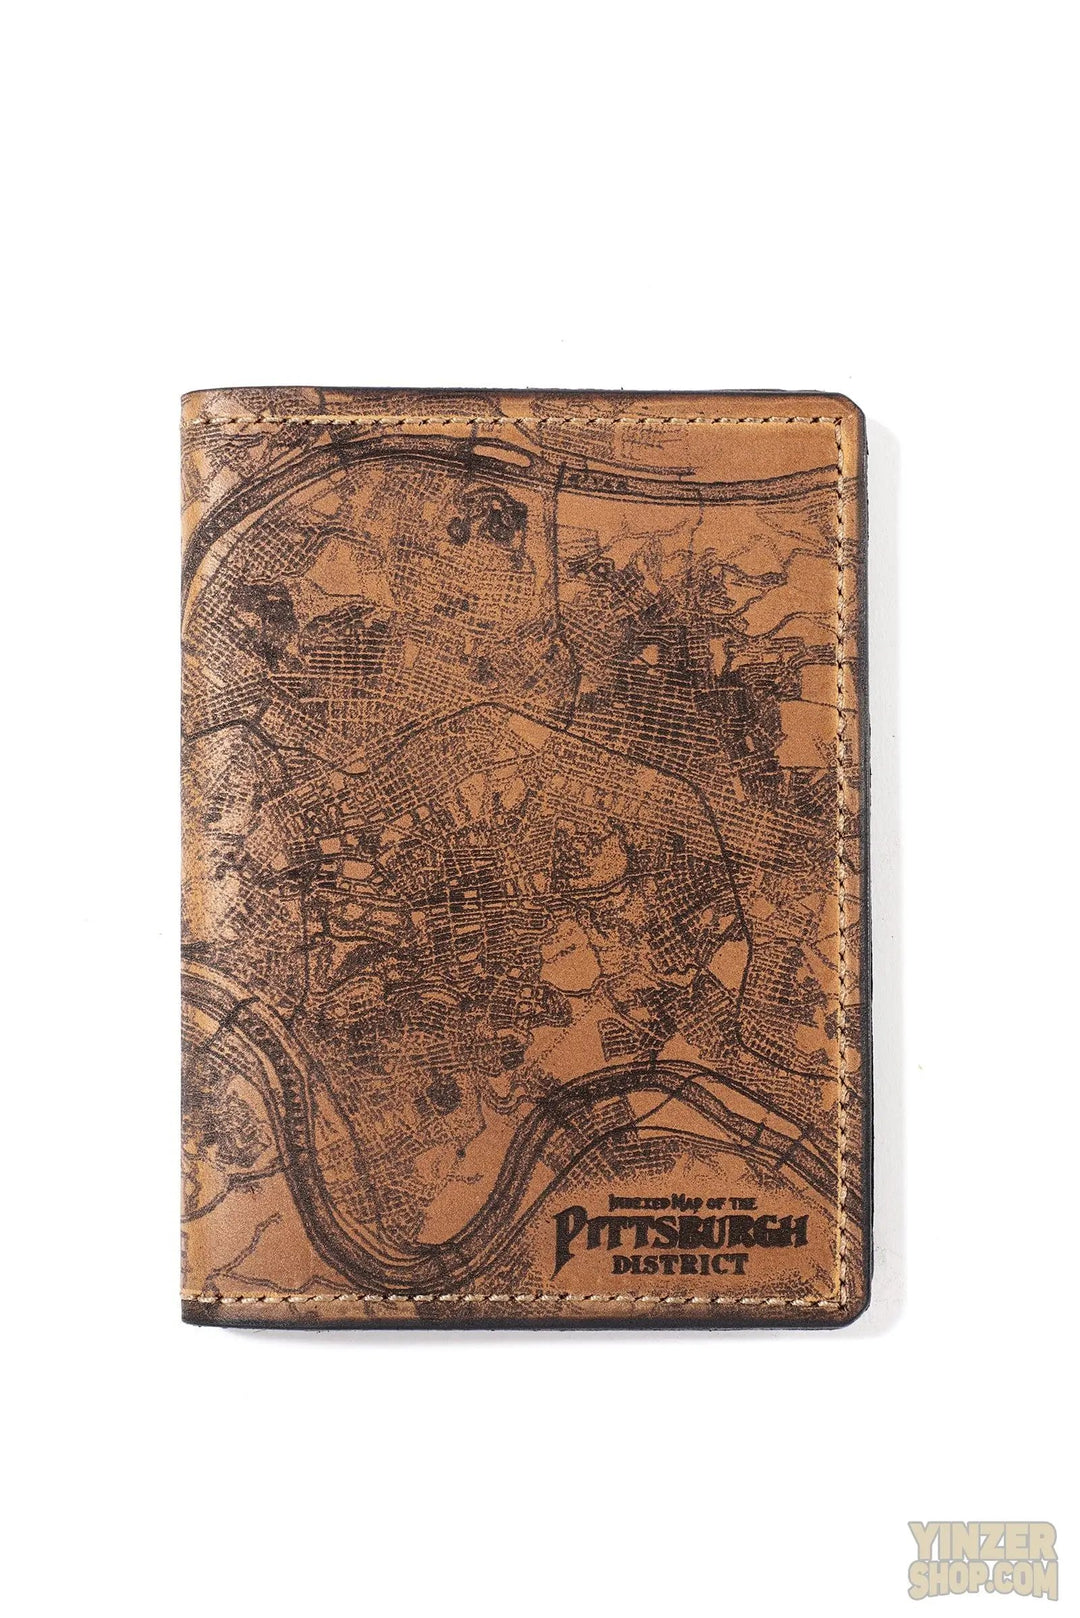 Handmade Leather Etched Pittsburgh Map Passport Wallet  Tactilecraftworks.com   